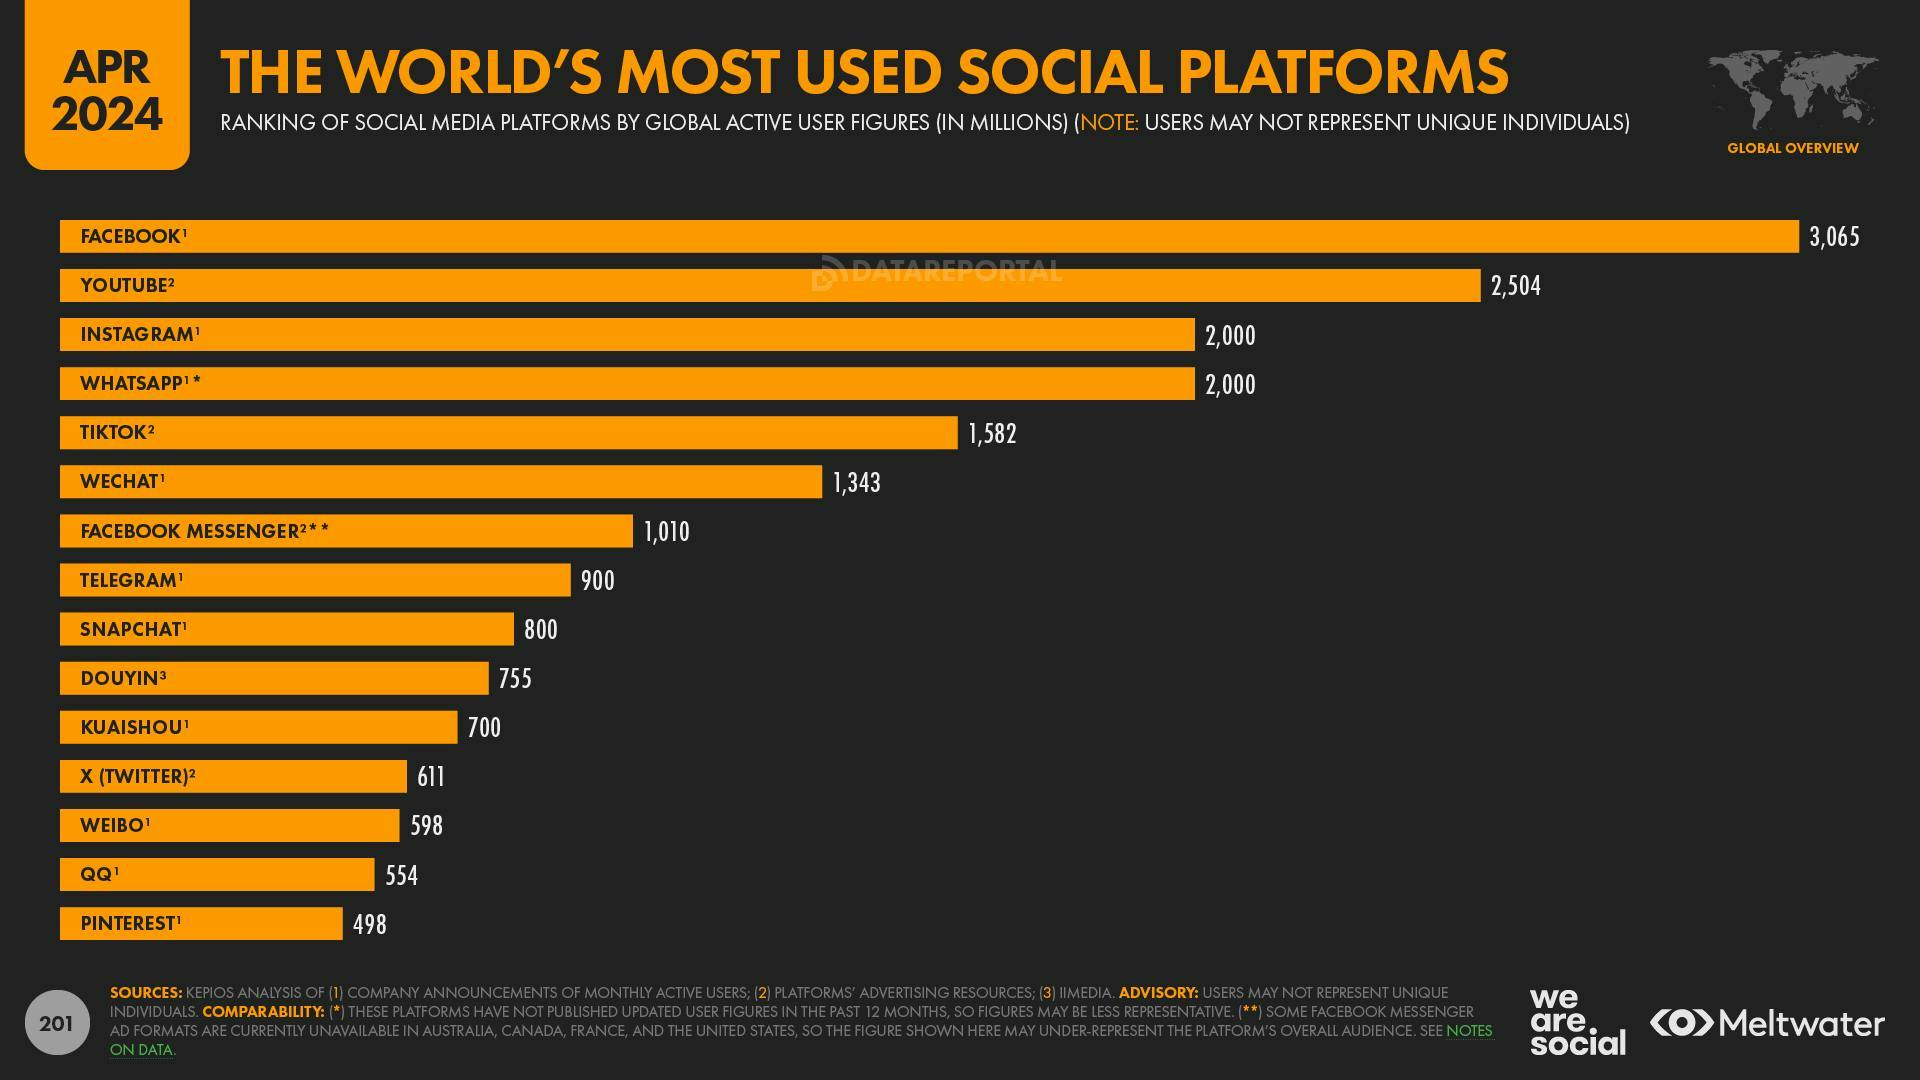 The world's most used social platforms